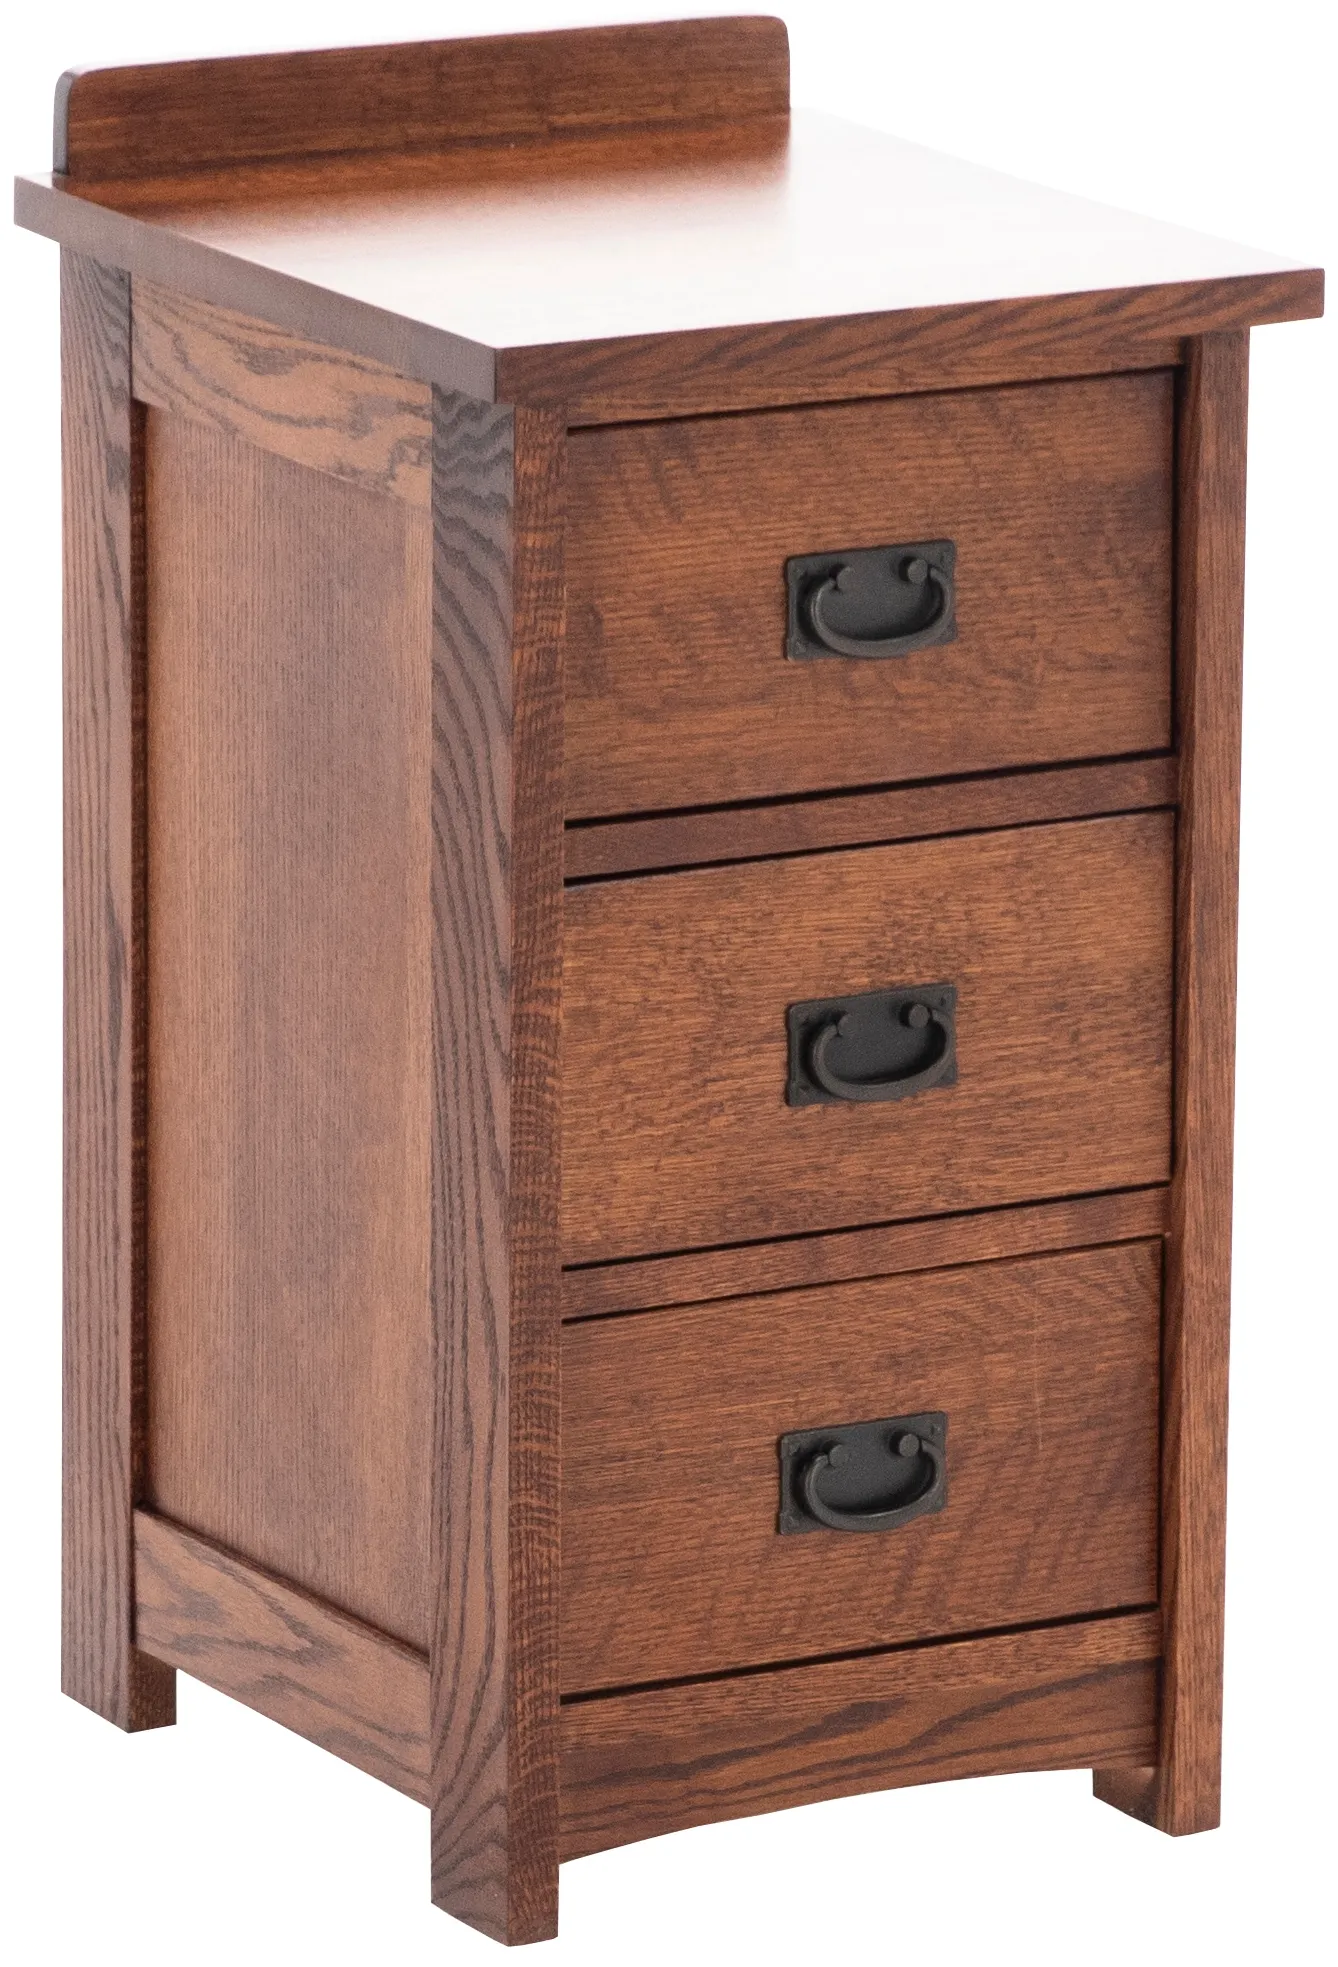 Witmer American Mission #80 17"W Nightstand